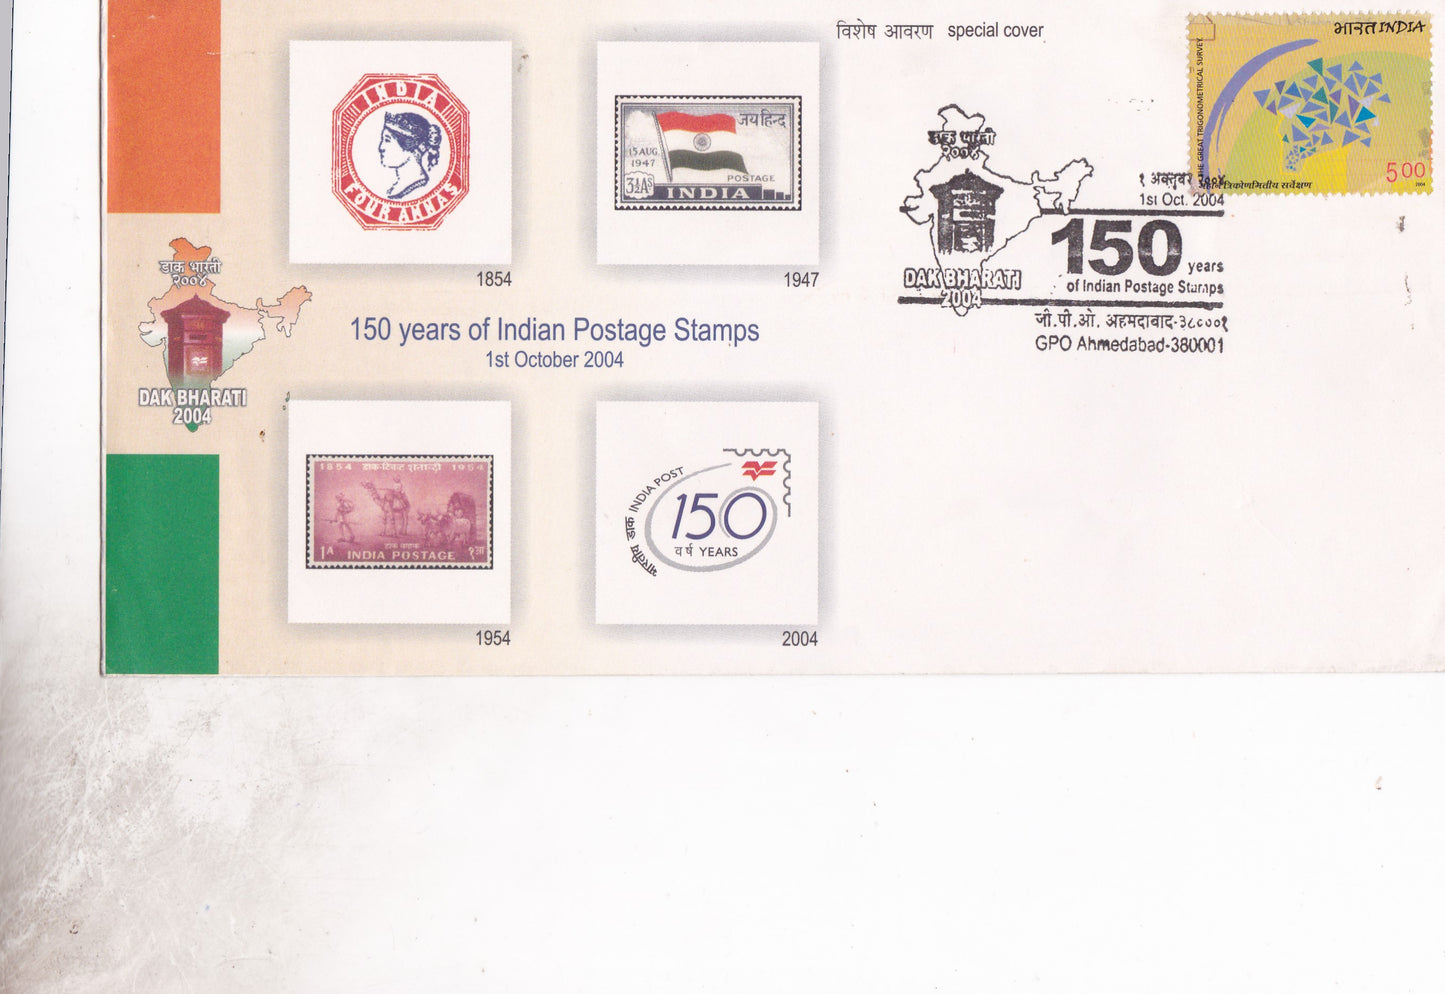 Special Cover on 150 years of Indian Postage Stamps